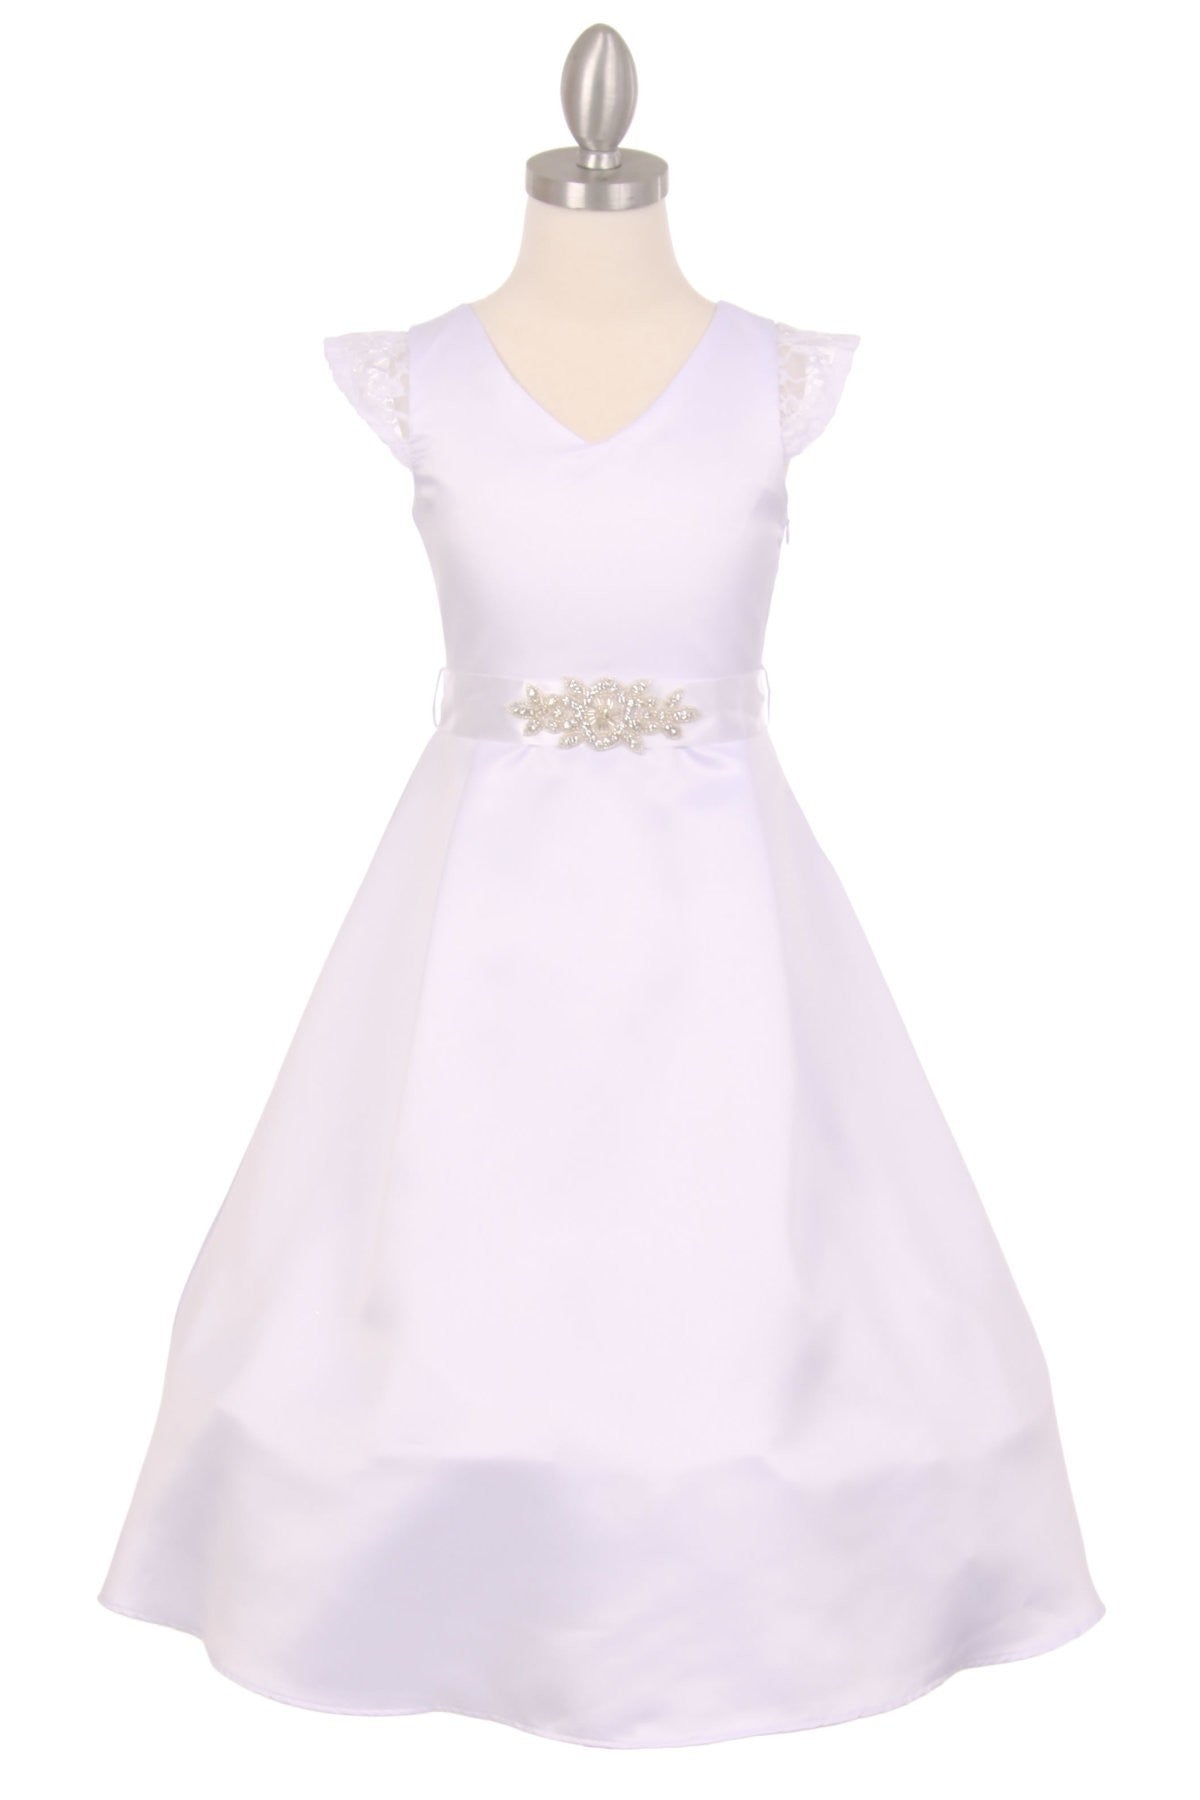 Cap Lace Sleeve Satin Girl Communion Dress by Cinderella Couture USA AS2009